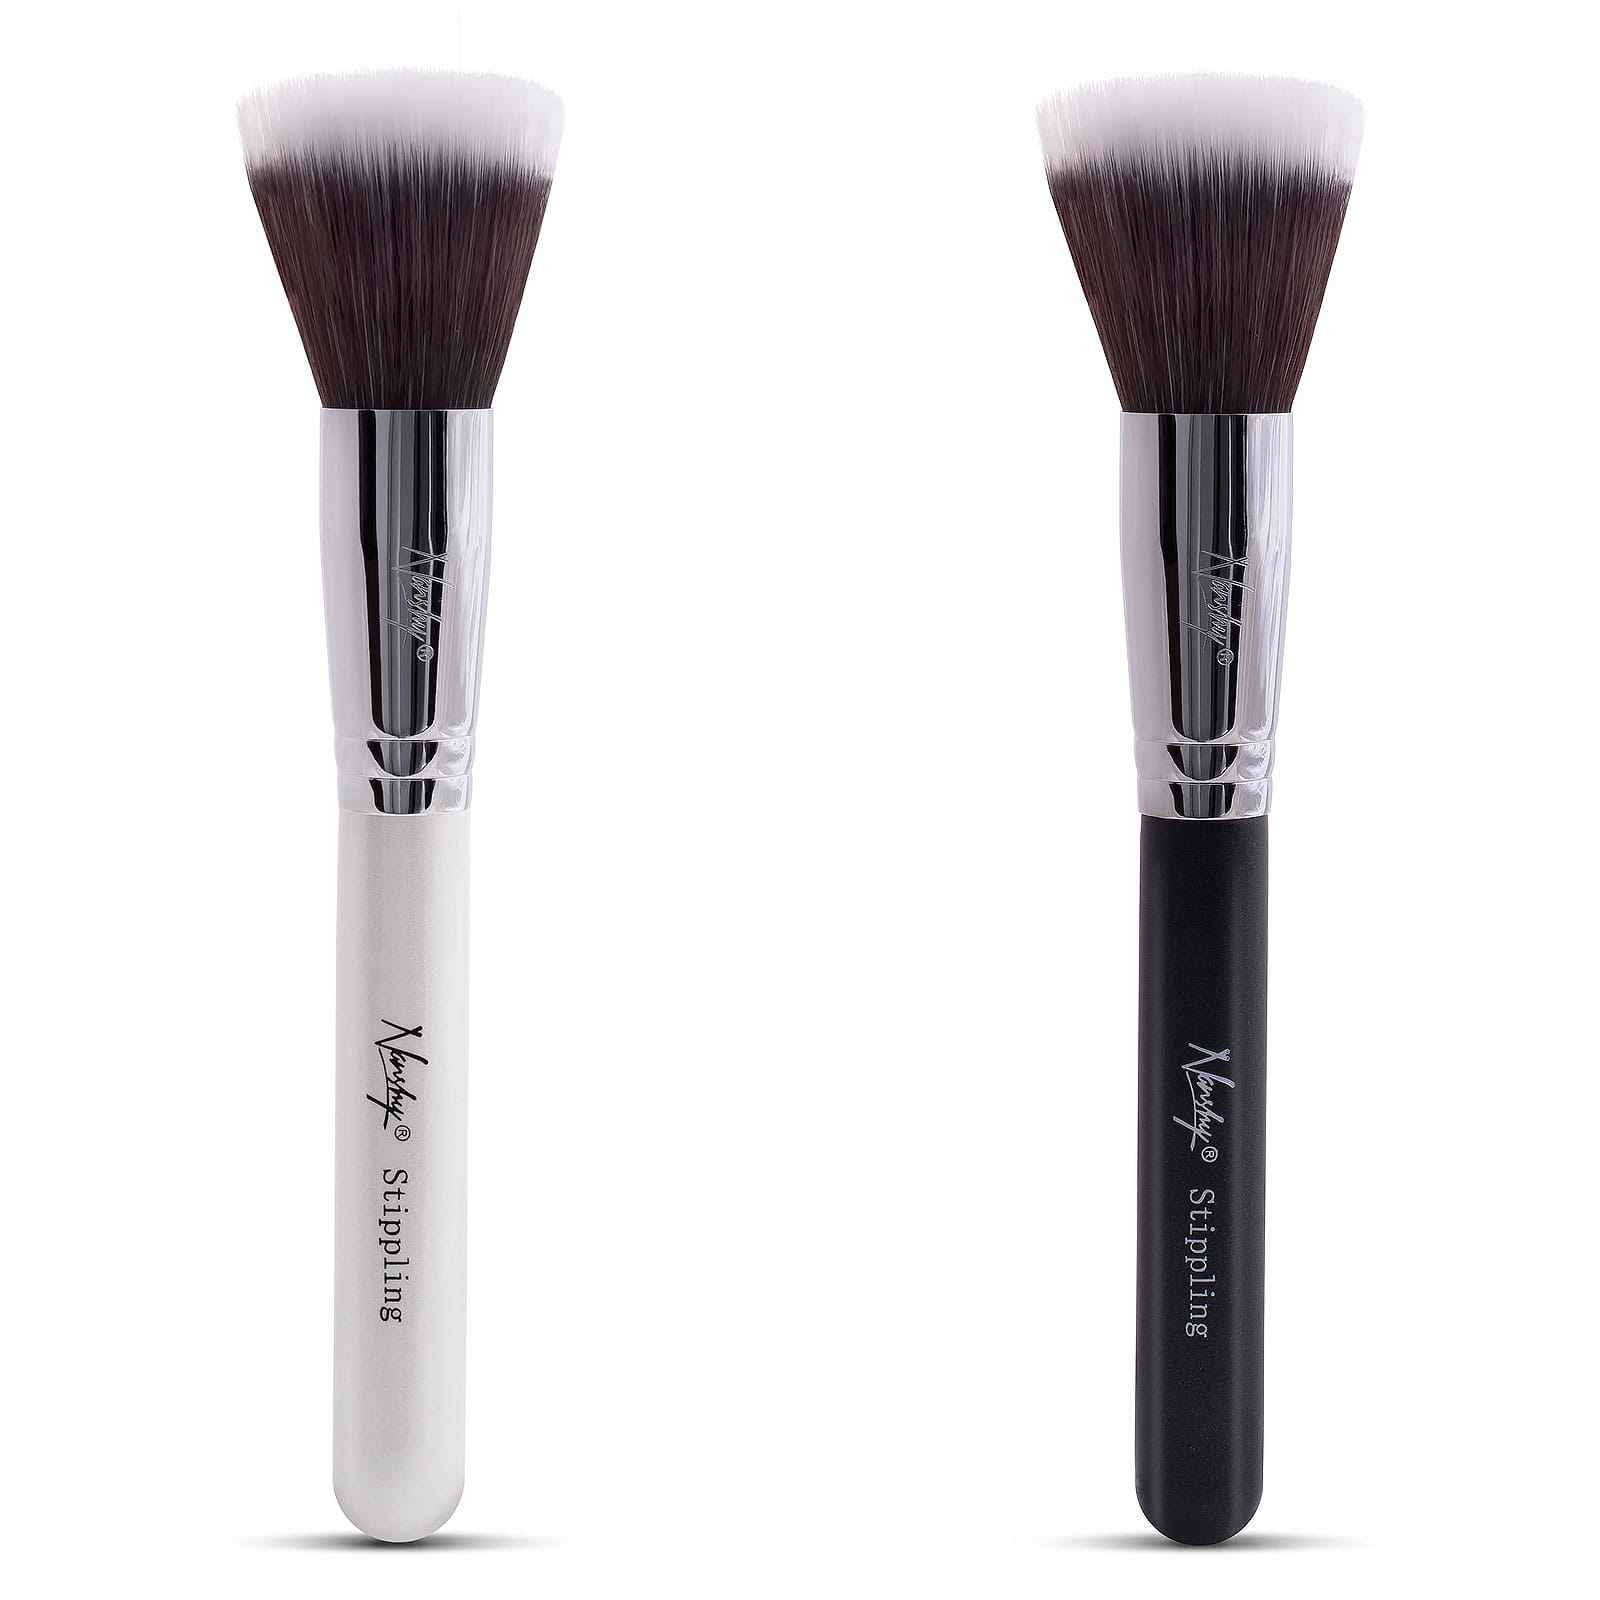 Stippling Brush for Flawless Makeup